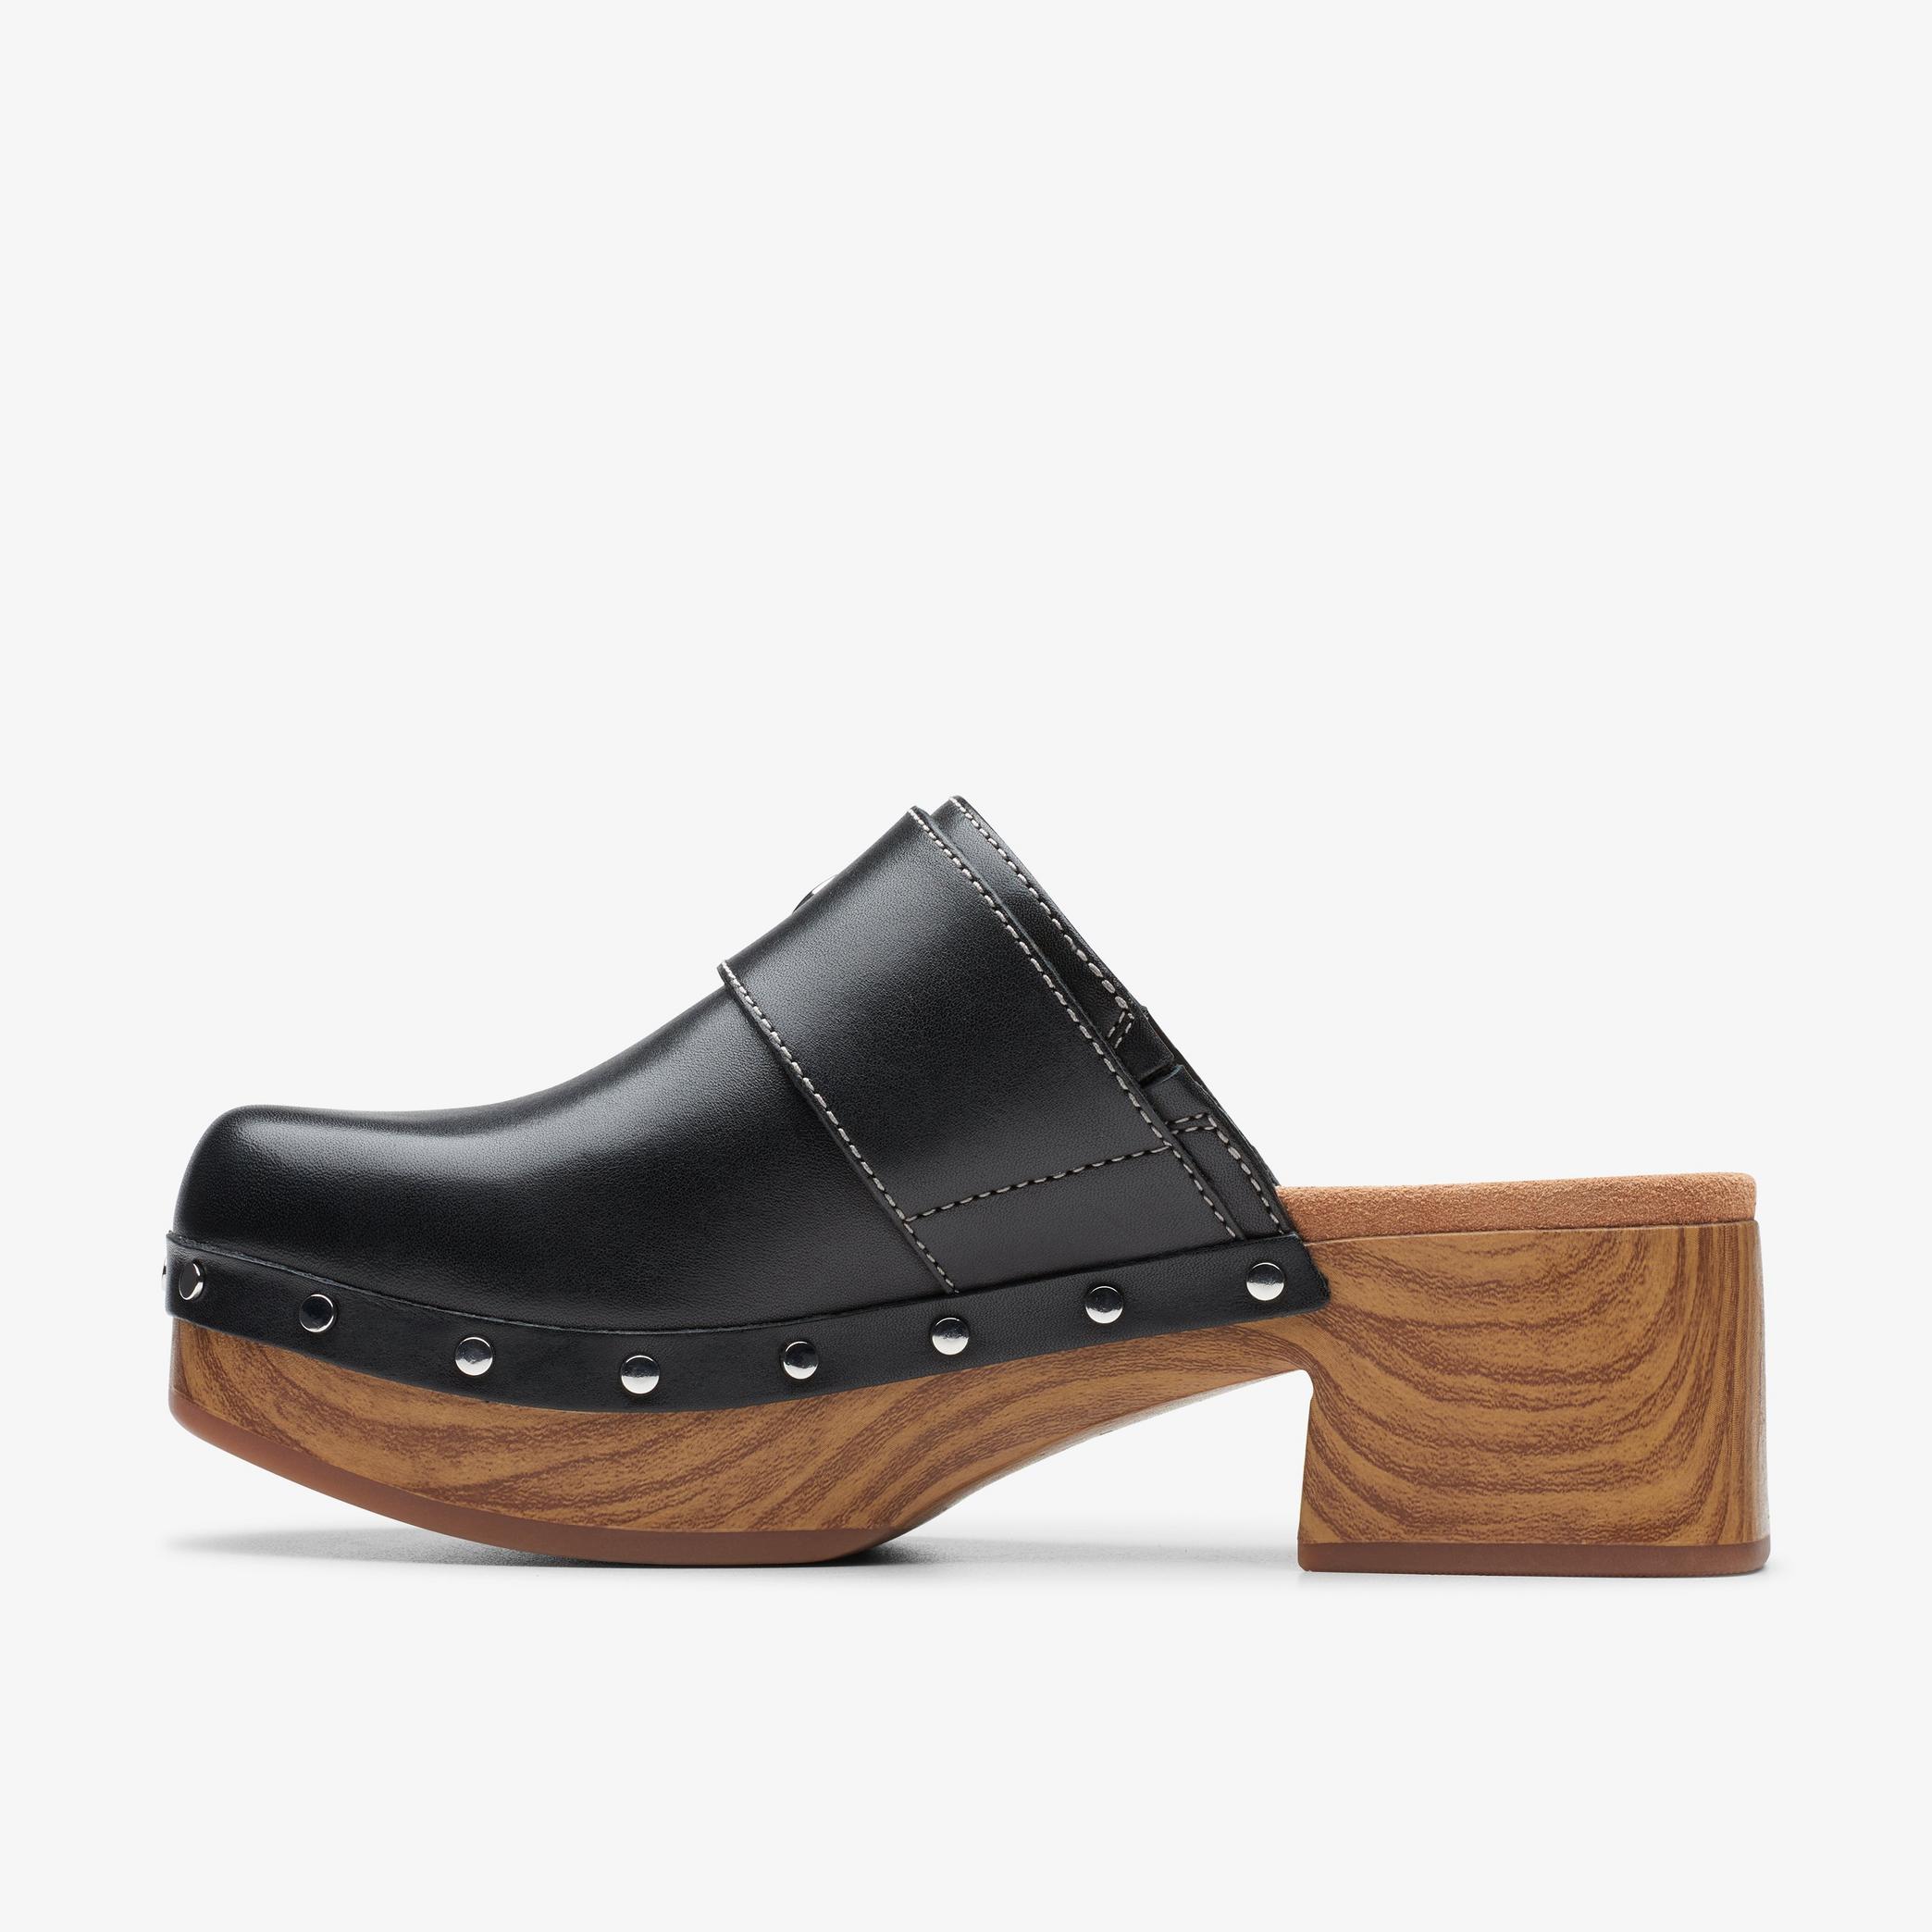 Sivanne Sun Black Leather Mules, view 2 of 6